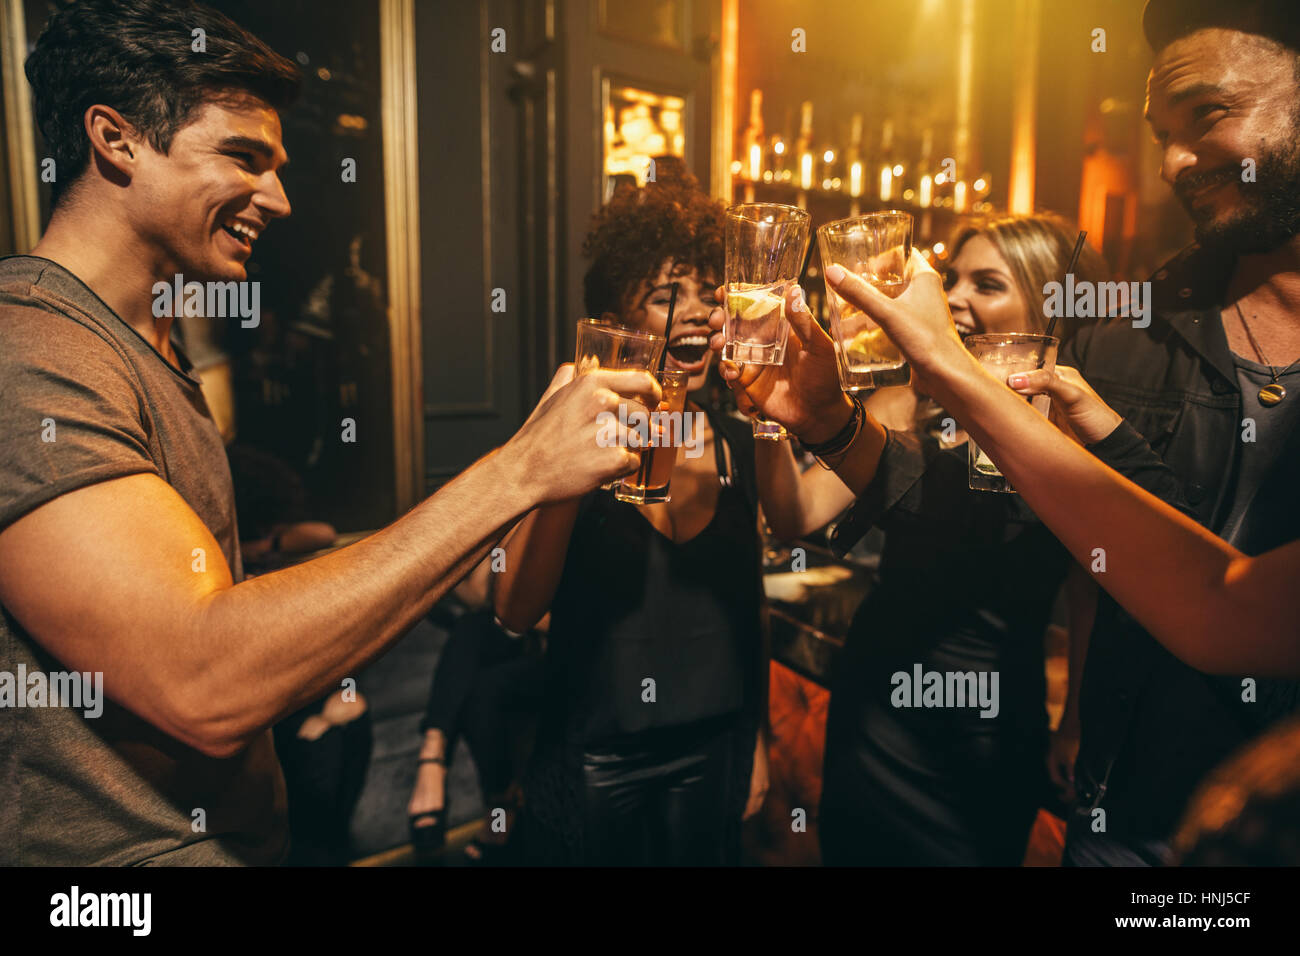 Group of men and women enjoying drinks at nightclub. Young people at bar toasting cocktails and laughing. Stock Photo